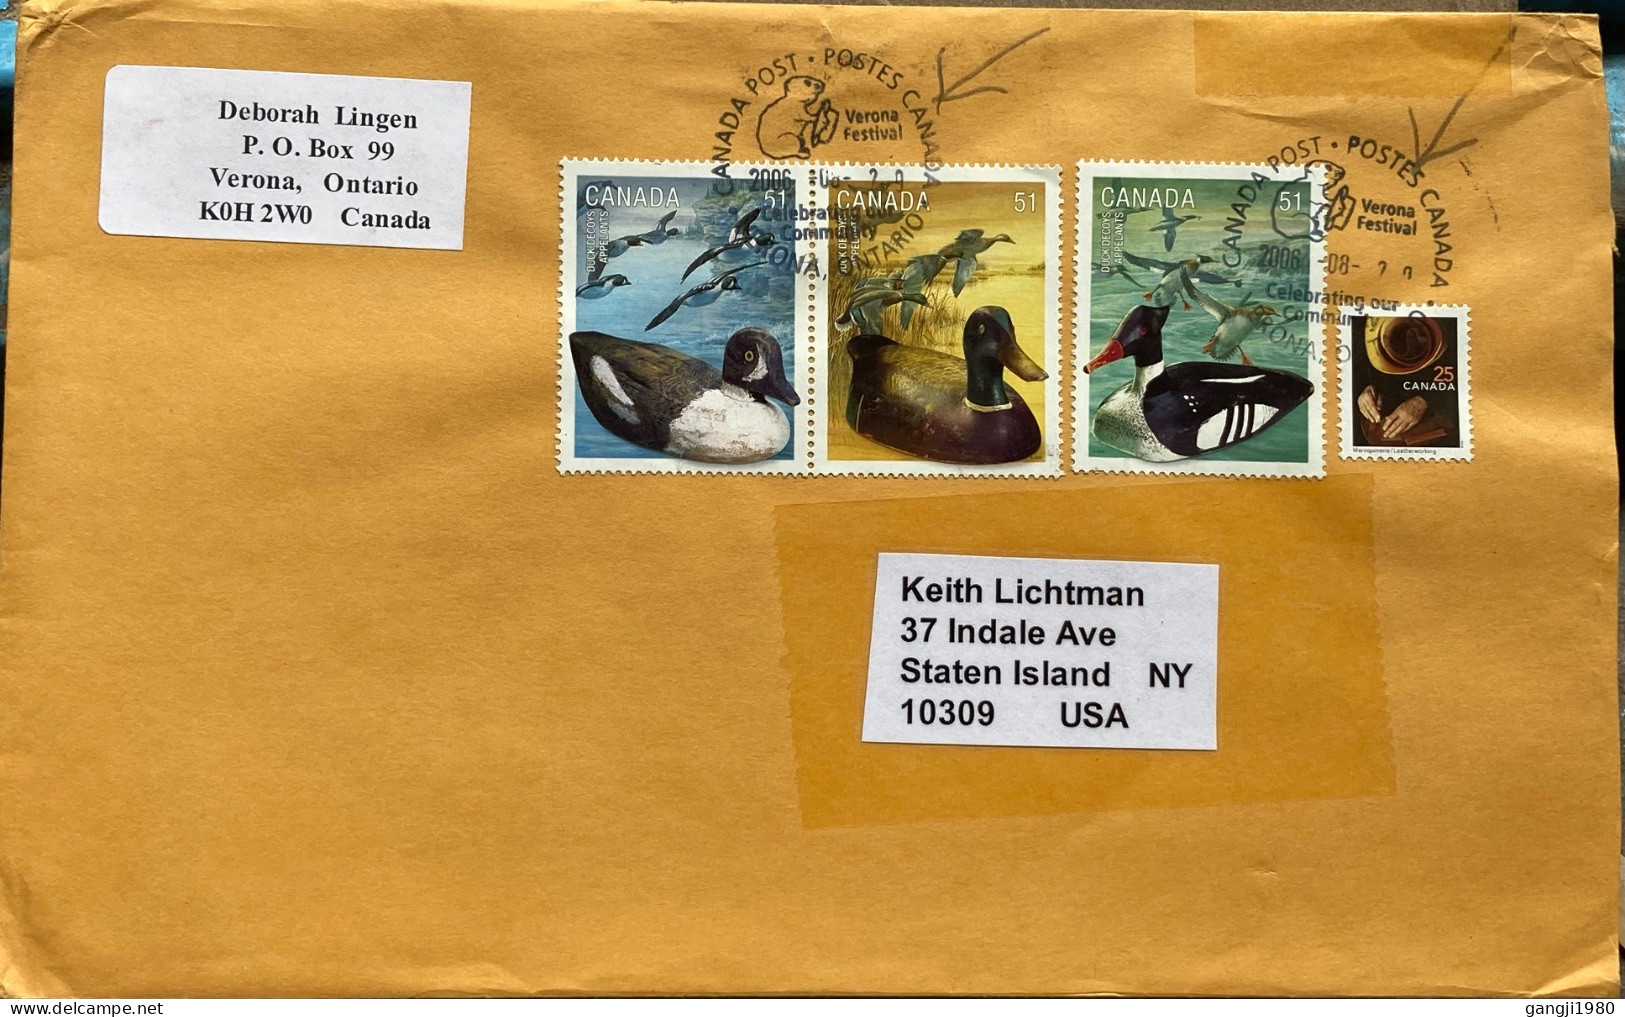 CANADA-2006, COVER USED TO USA, 4 BIRD DUCK STAMP, ANIMAL PICTURE CANCEL, VERON CITY FESTIVAL, CELEBRATING OUR COMMUNITY - Storia Postale